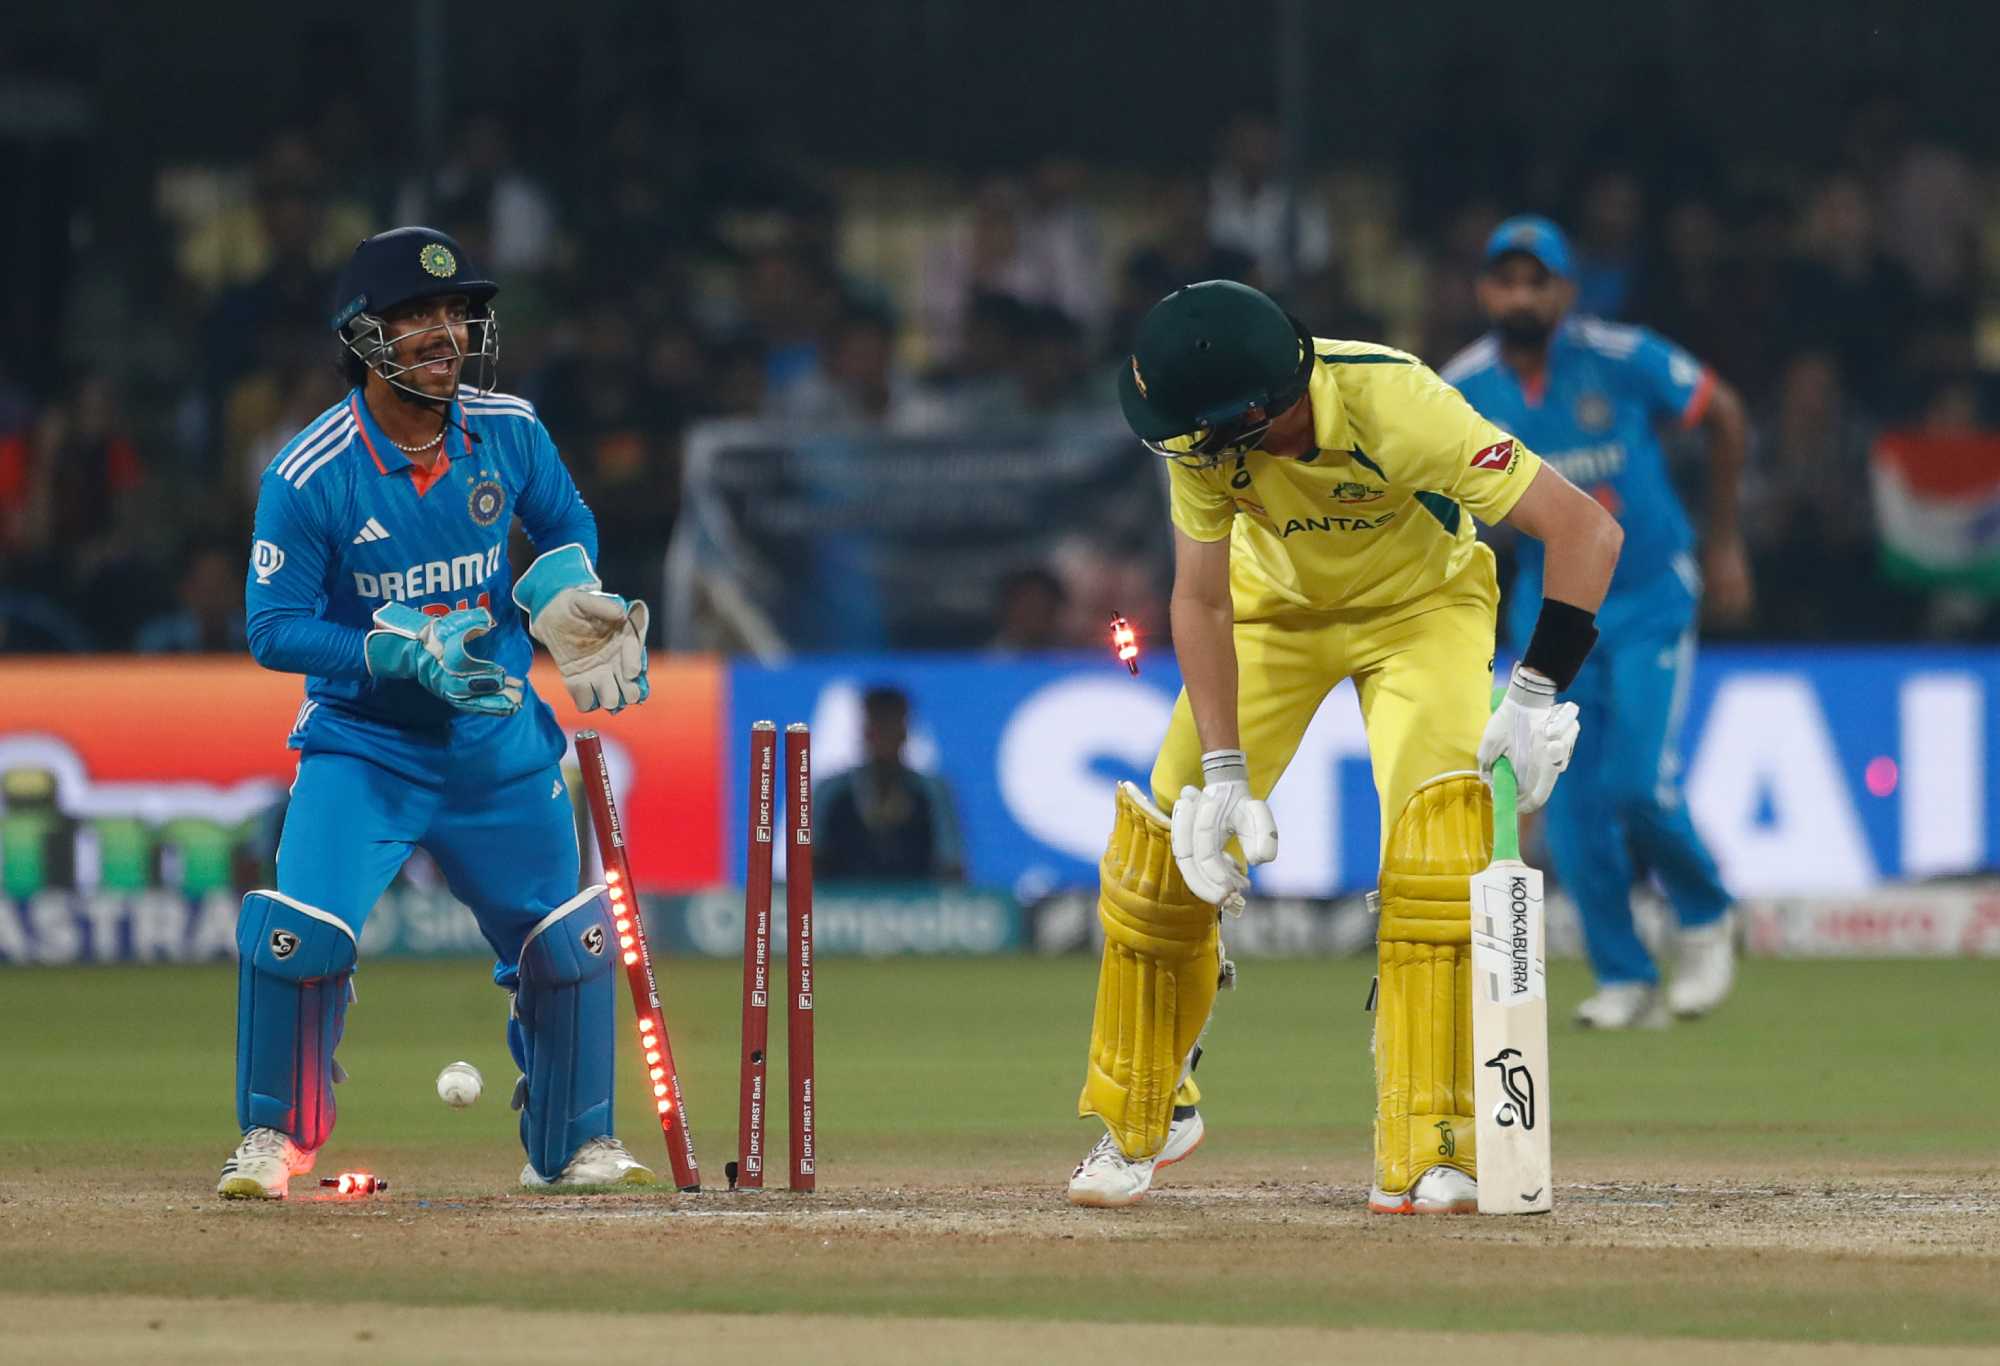 INDORE, INDIA - SEPTEMBER 24: Marnus Labuschagne of Australia bowled out by Ravichandran Ashwin of India during game two of the One Day International series between India and Australia at Holkar Cricket Stadium on September 24, 2023 in Indore, India. (Photo by Pankaj Nangia/Getty Images)